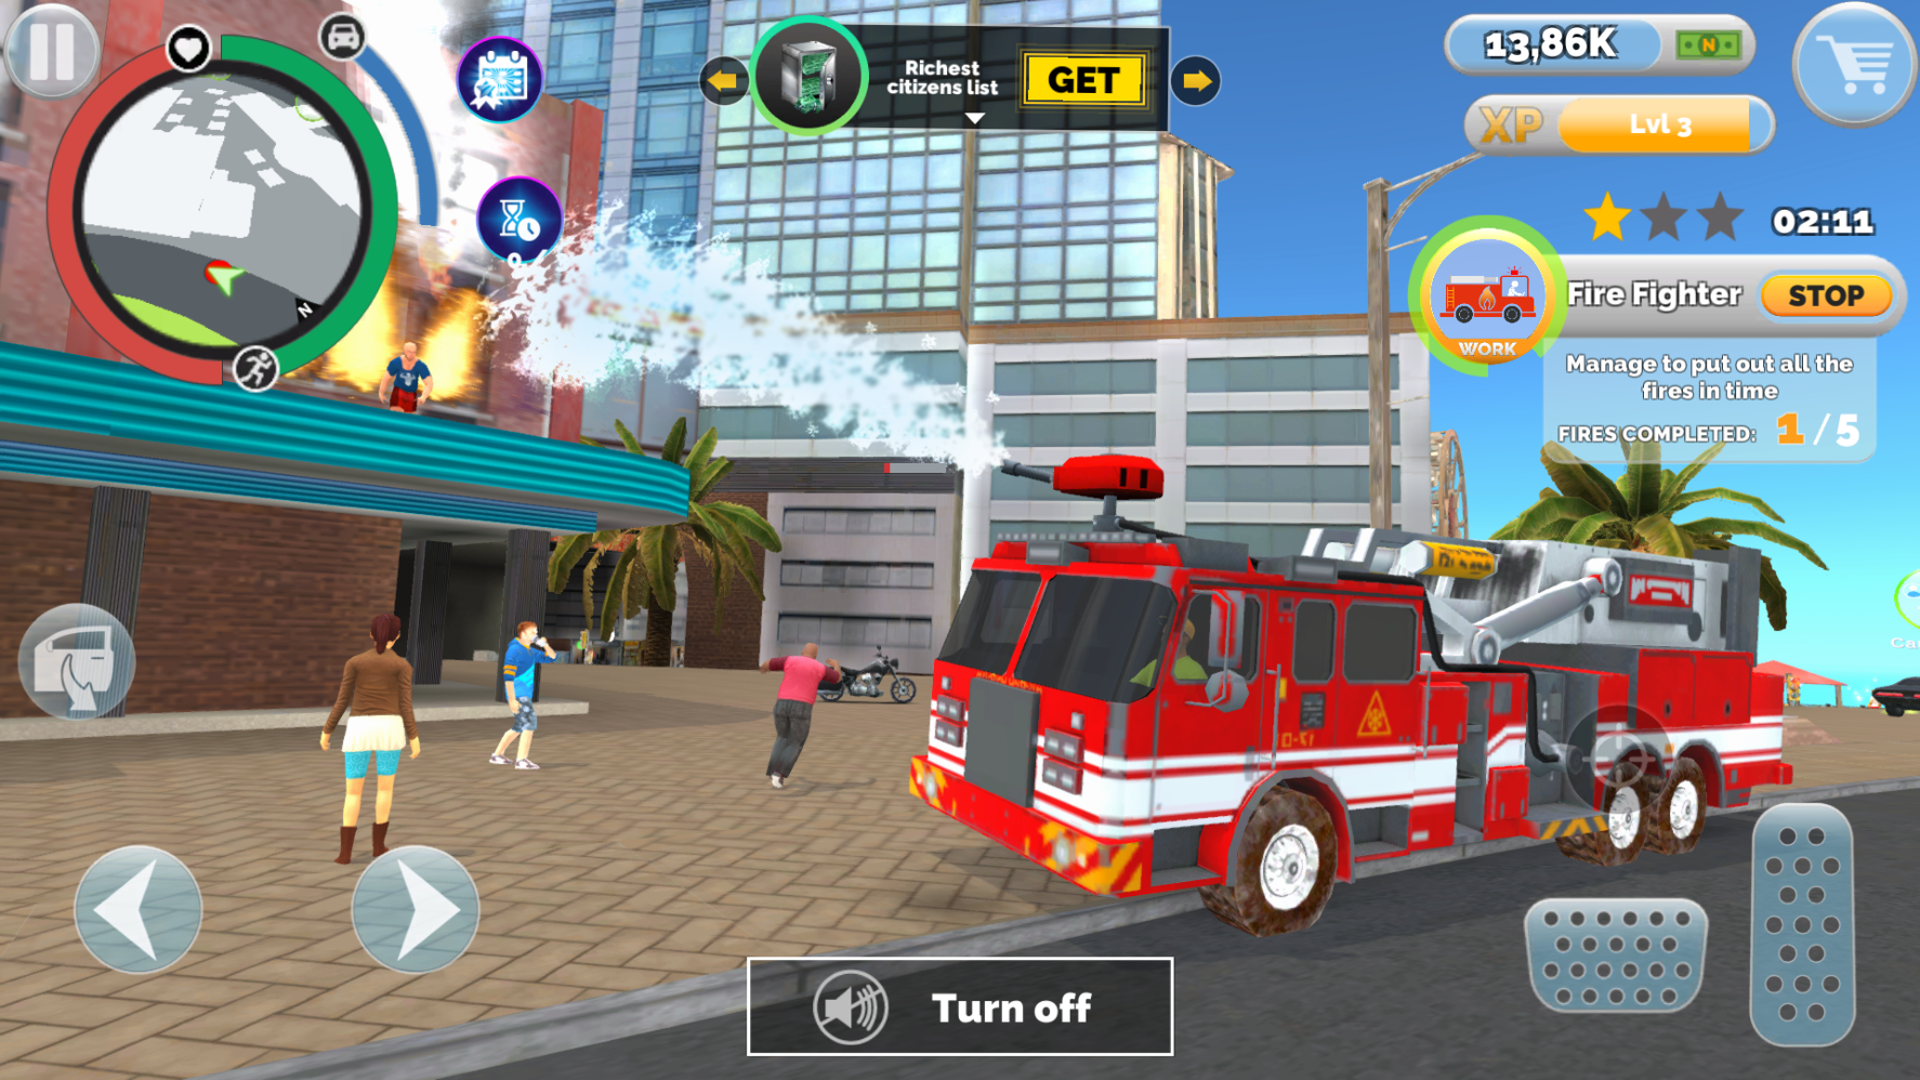 Screenshot 1 of City Sims: Live and Work 0.1.7